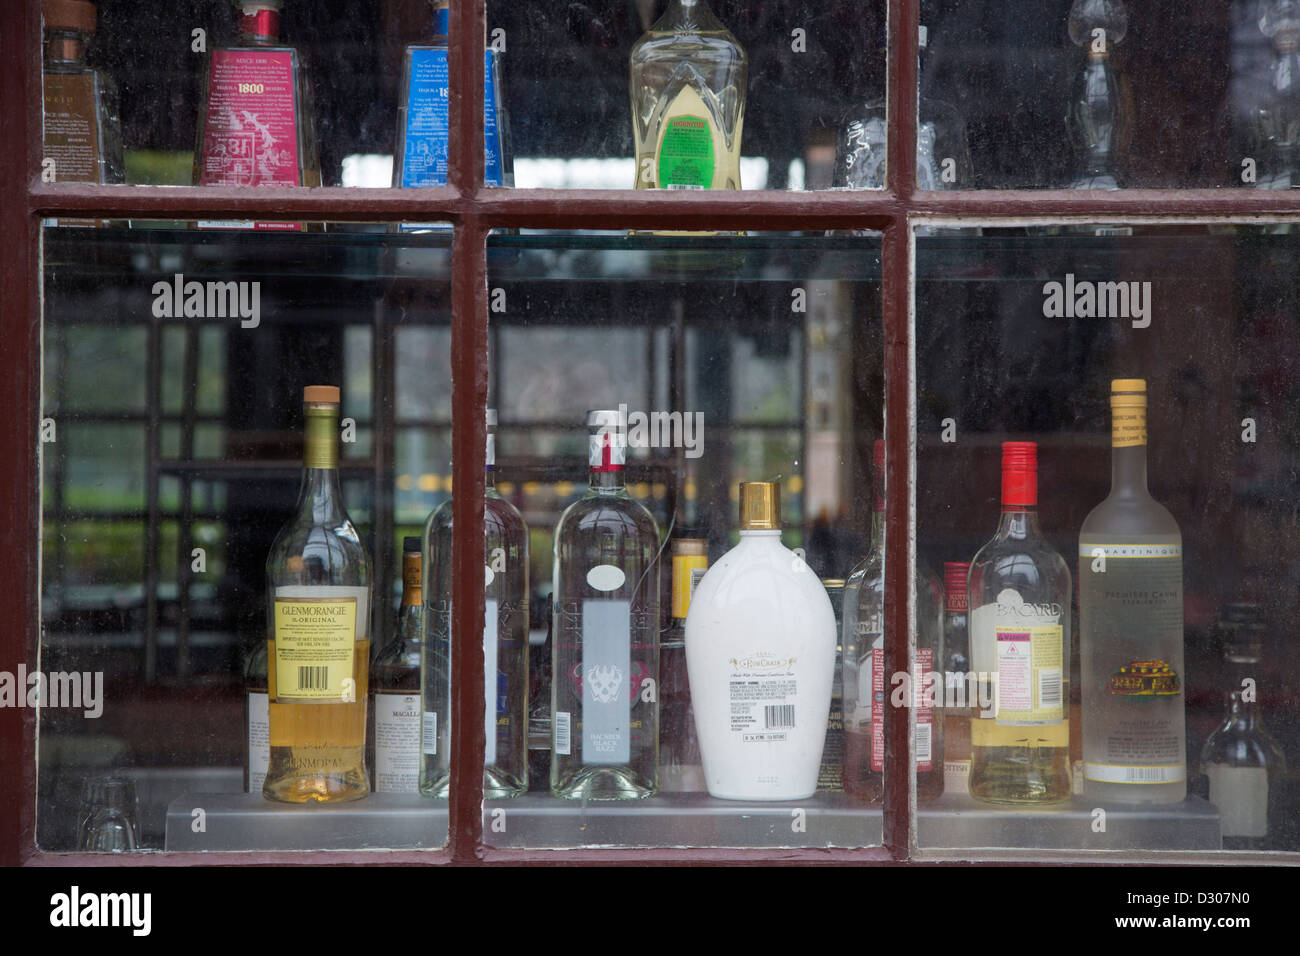 San Diego, California - Bottles in the window of a bar in downtown San Diego. Stock Photo